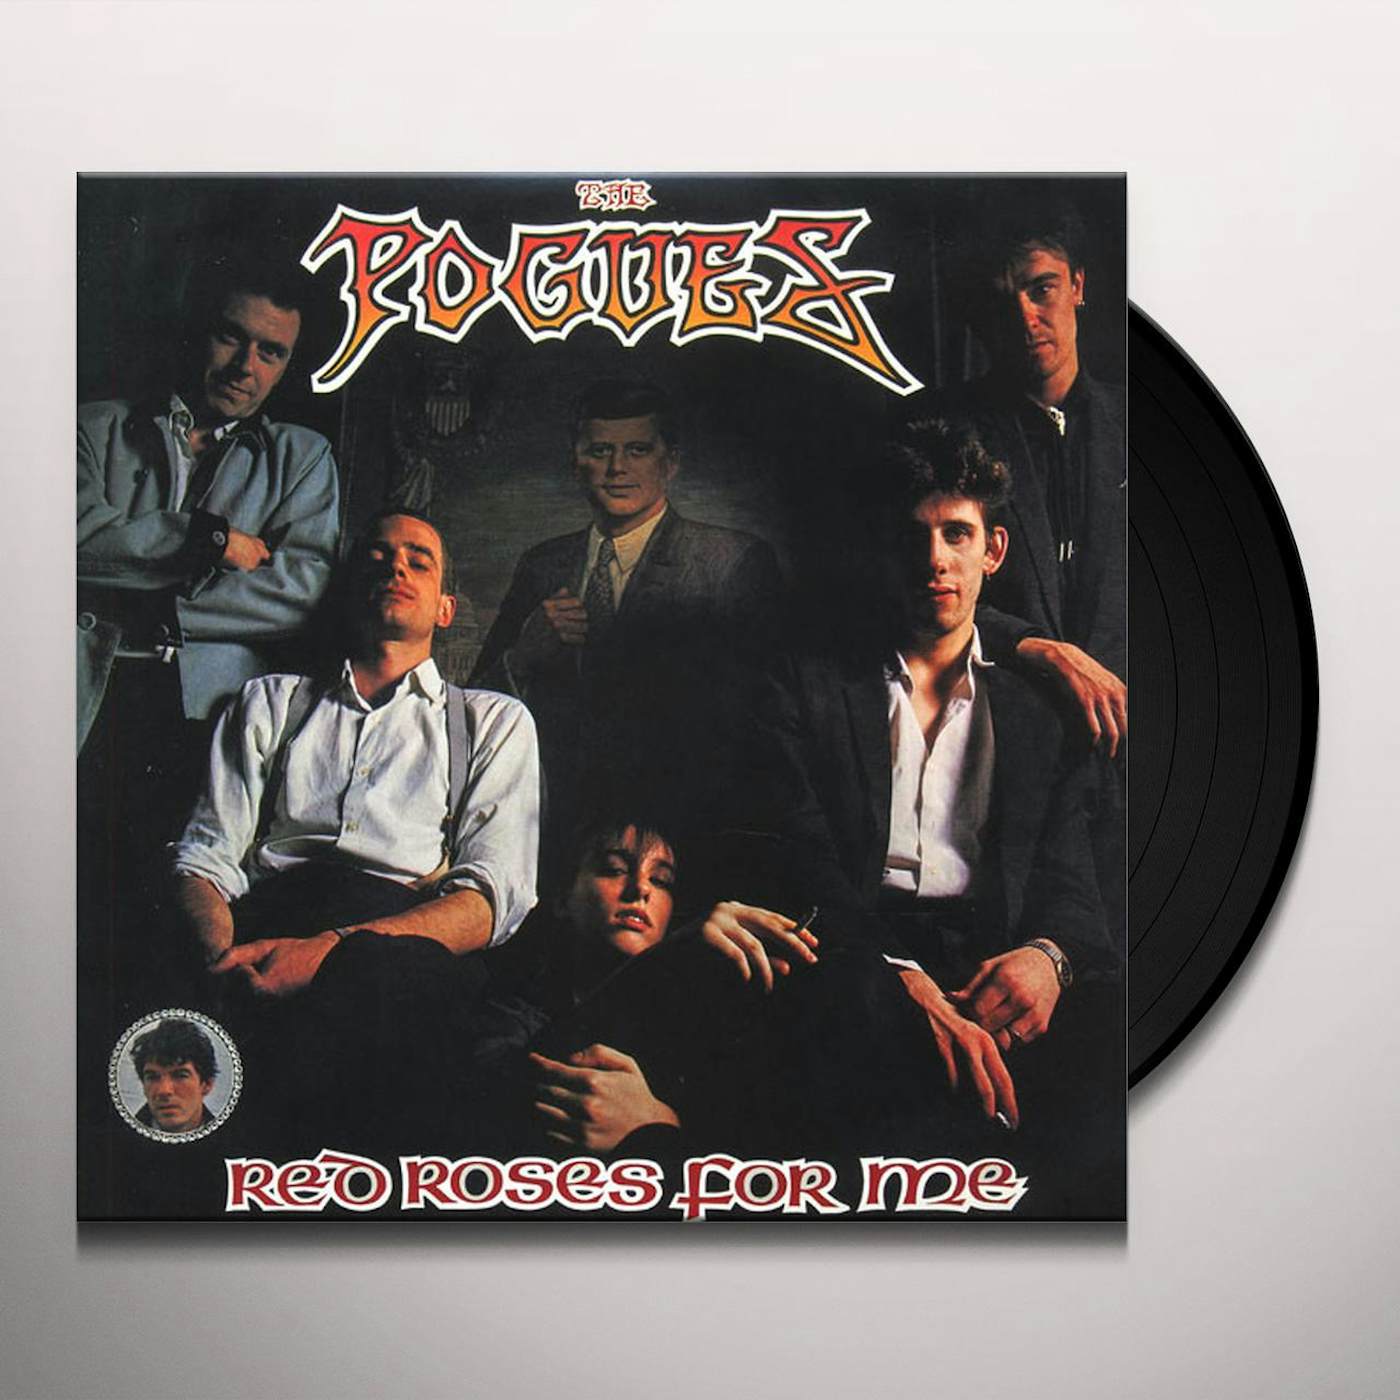 The Pogues Red Roses For Me Vinyl Record